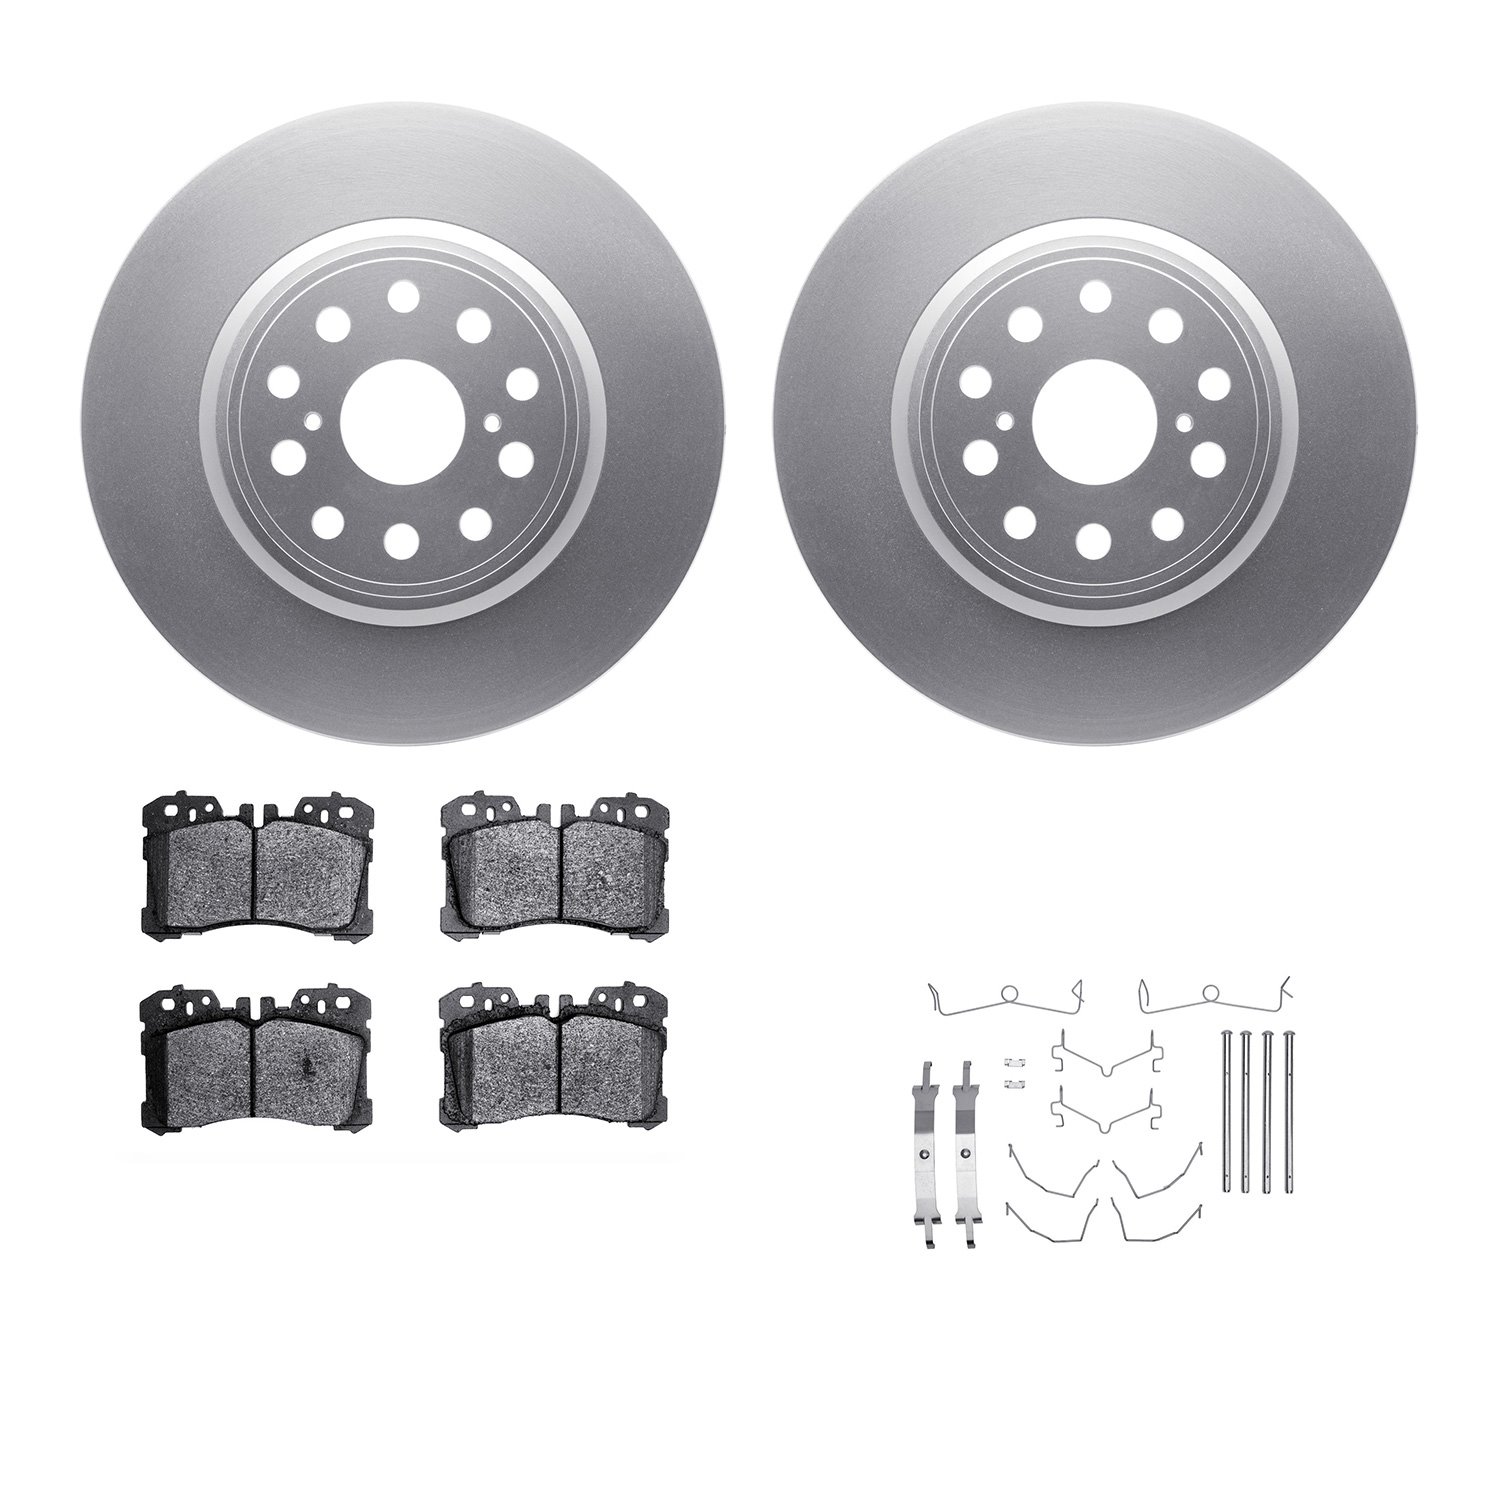 4312-75019 Geospec Brake Rotors with 3000-Series Ceramic Brake Pads & Hardware, Fits Select Lexus/Toyota/Scion, Position: Front